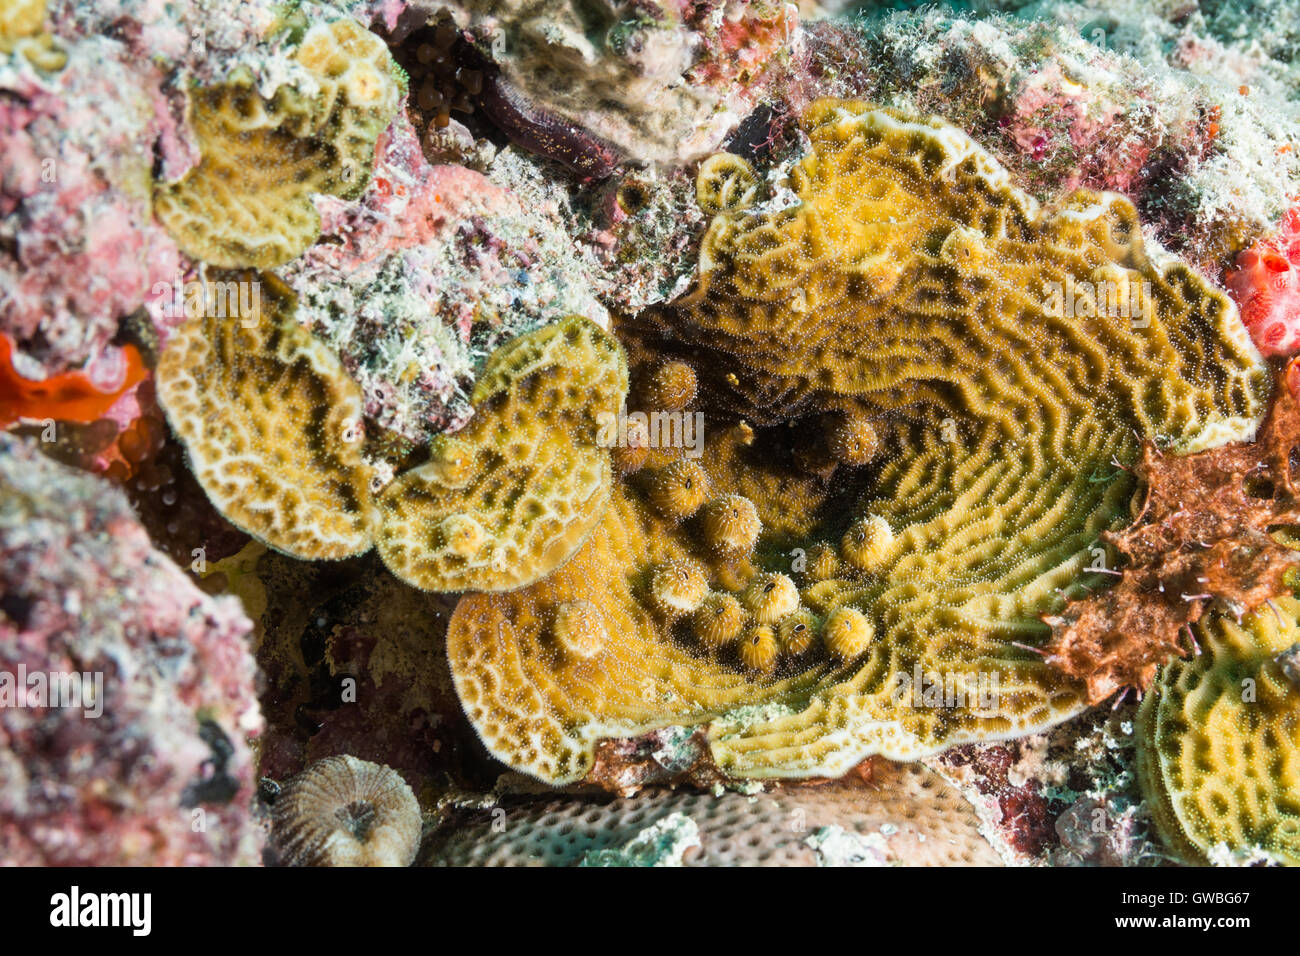 Agaricia agaricites reef coral underwater Abrolhos, Bahia, Brazil